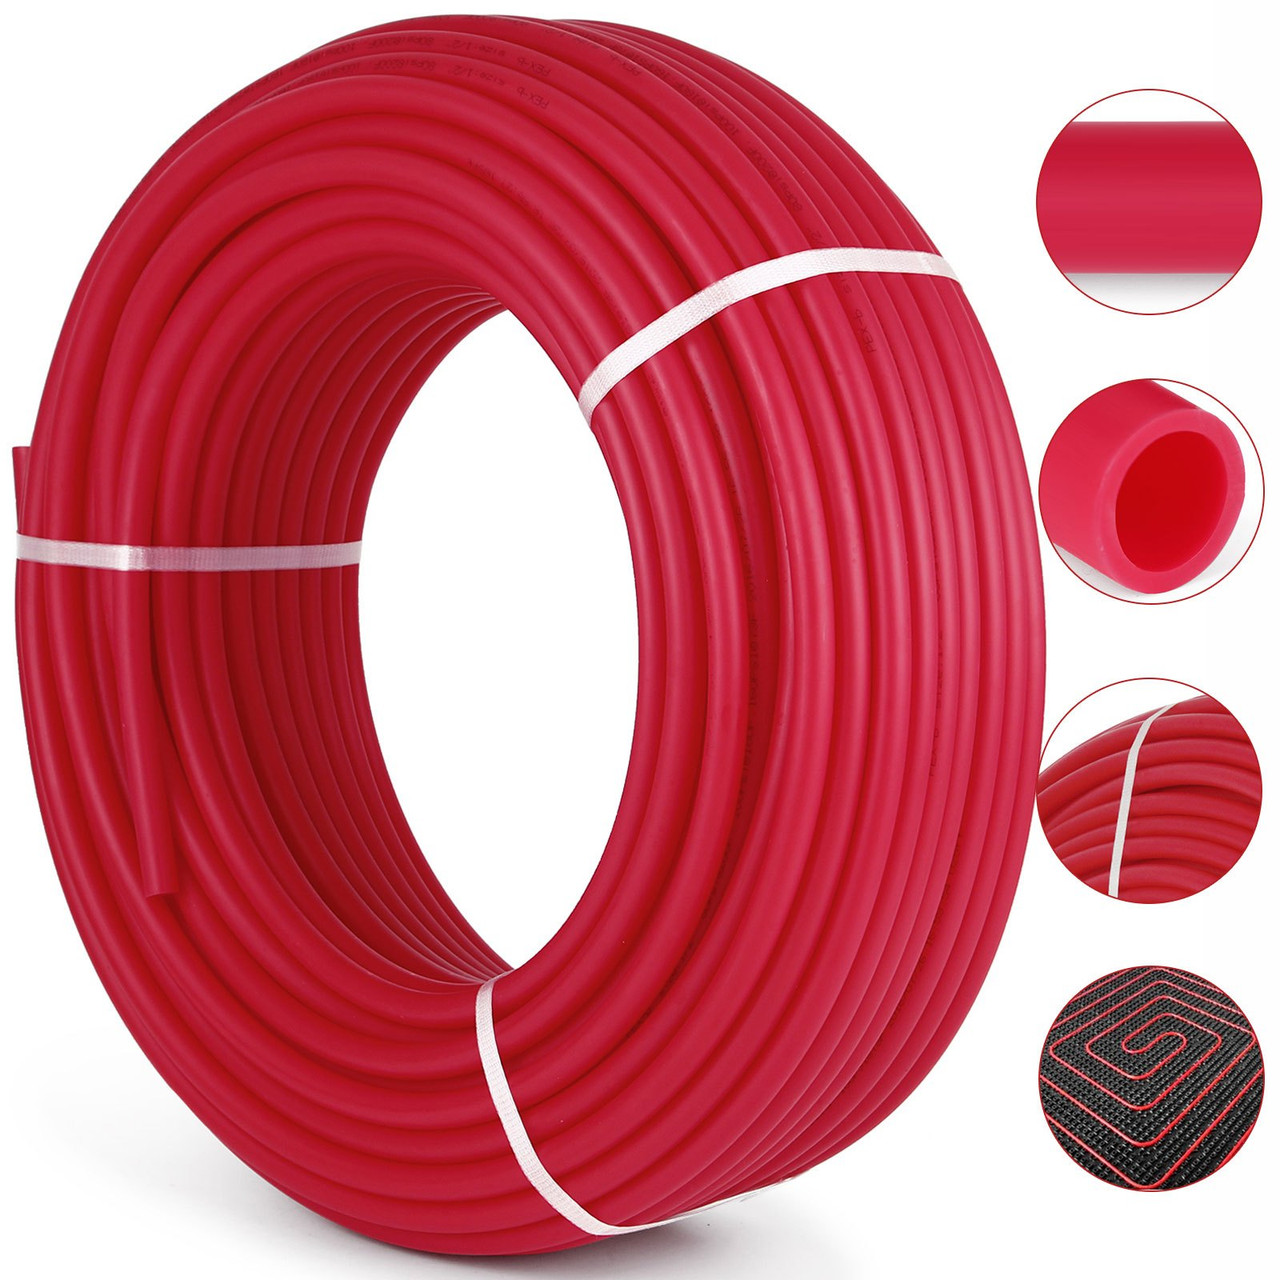 Oxygen Barrier PEX Tubing - 1/2 Inch X 500 Feet Tube Coil - EVOH PEX-B Pipe for Residential Commercial Radiant Floor Heating Pex Pipe (1/2" O2-Barrier, 500Ft/Red)